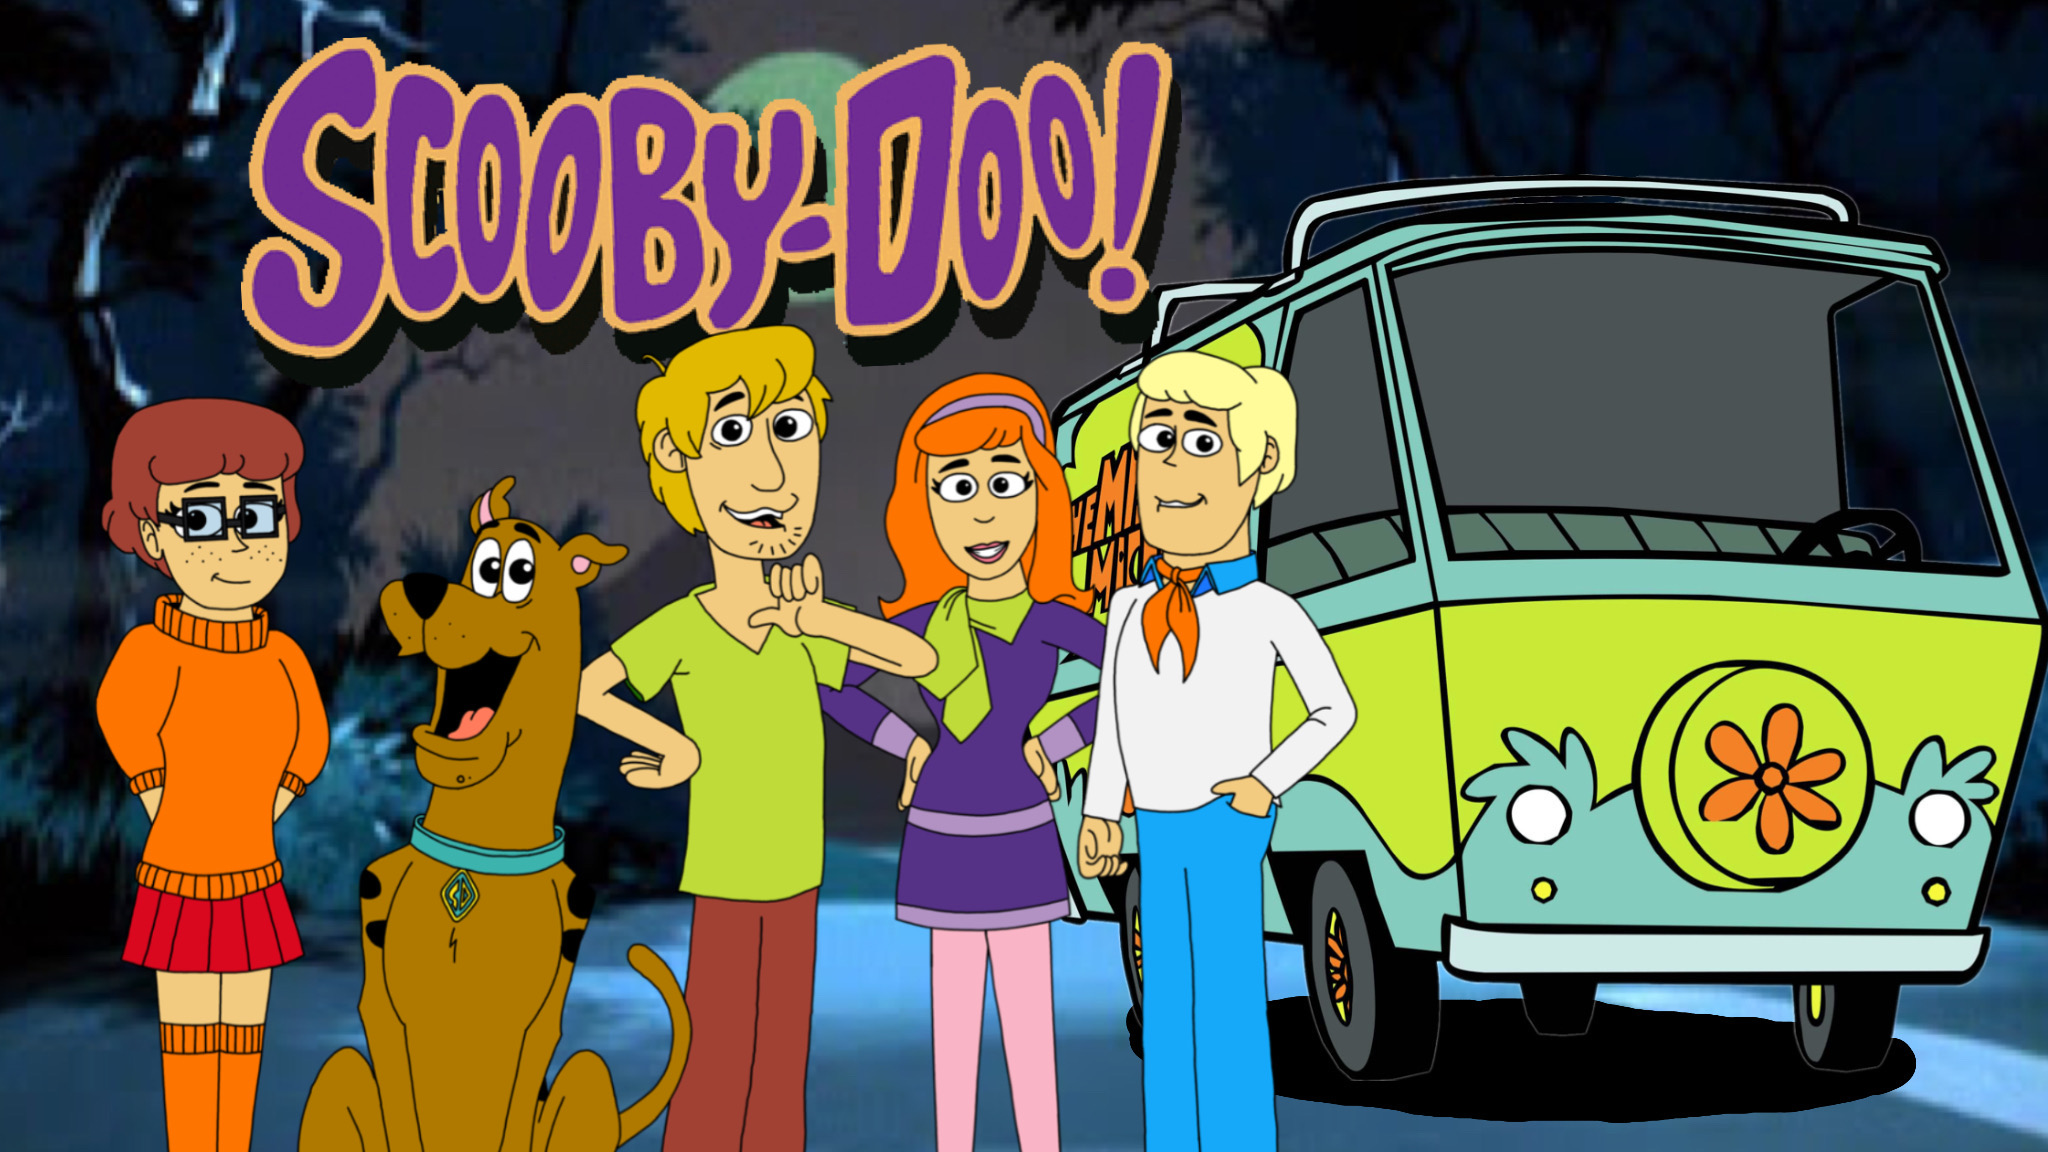 The scooby doo show